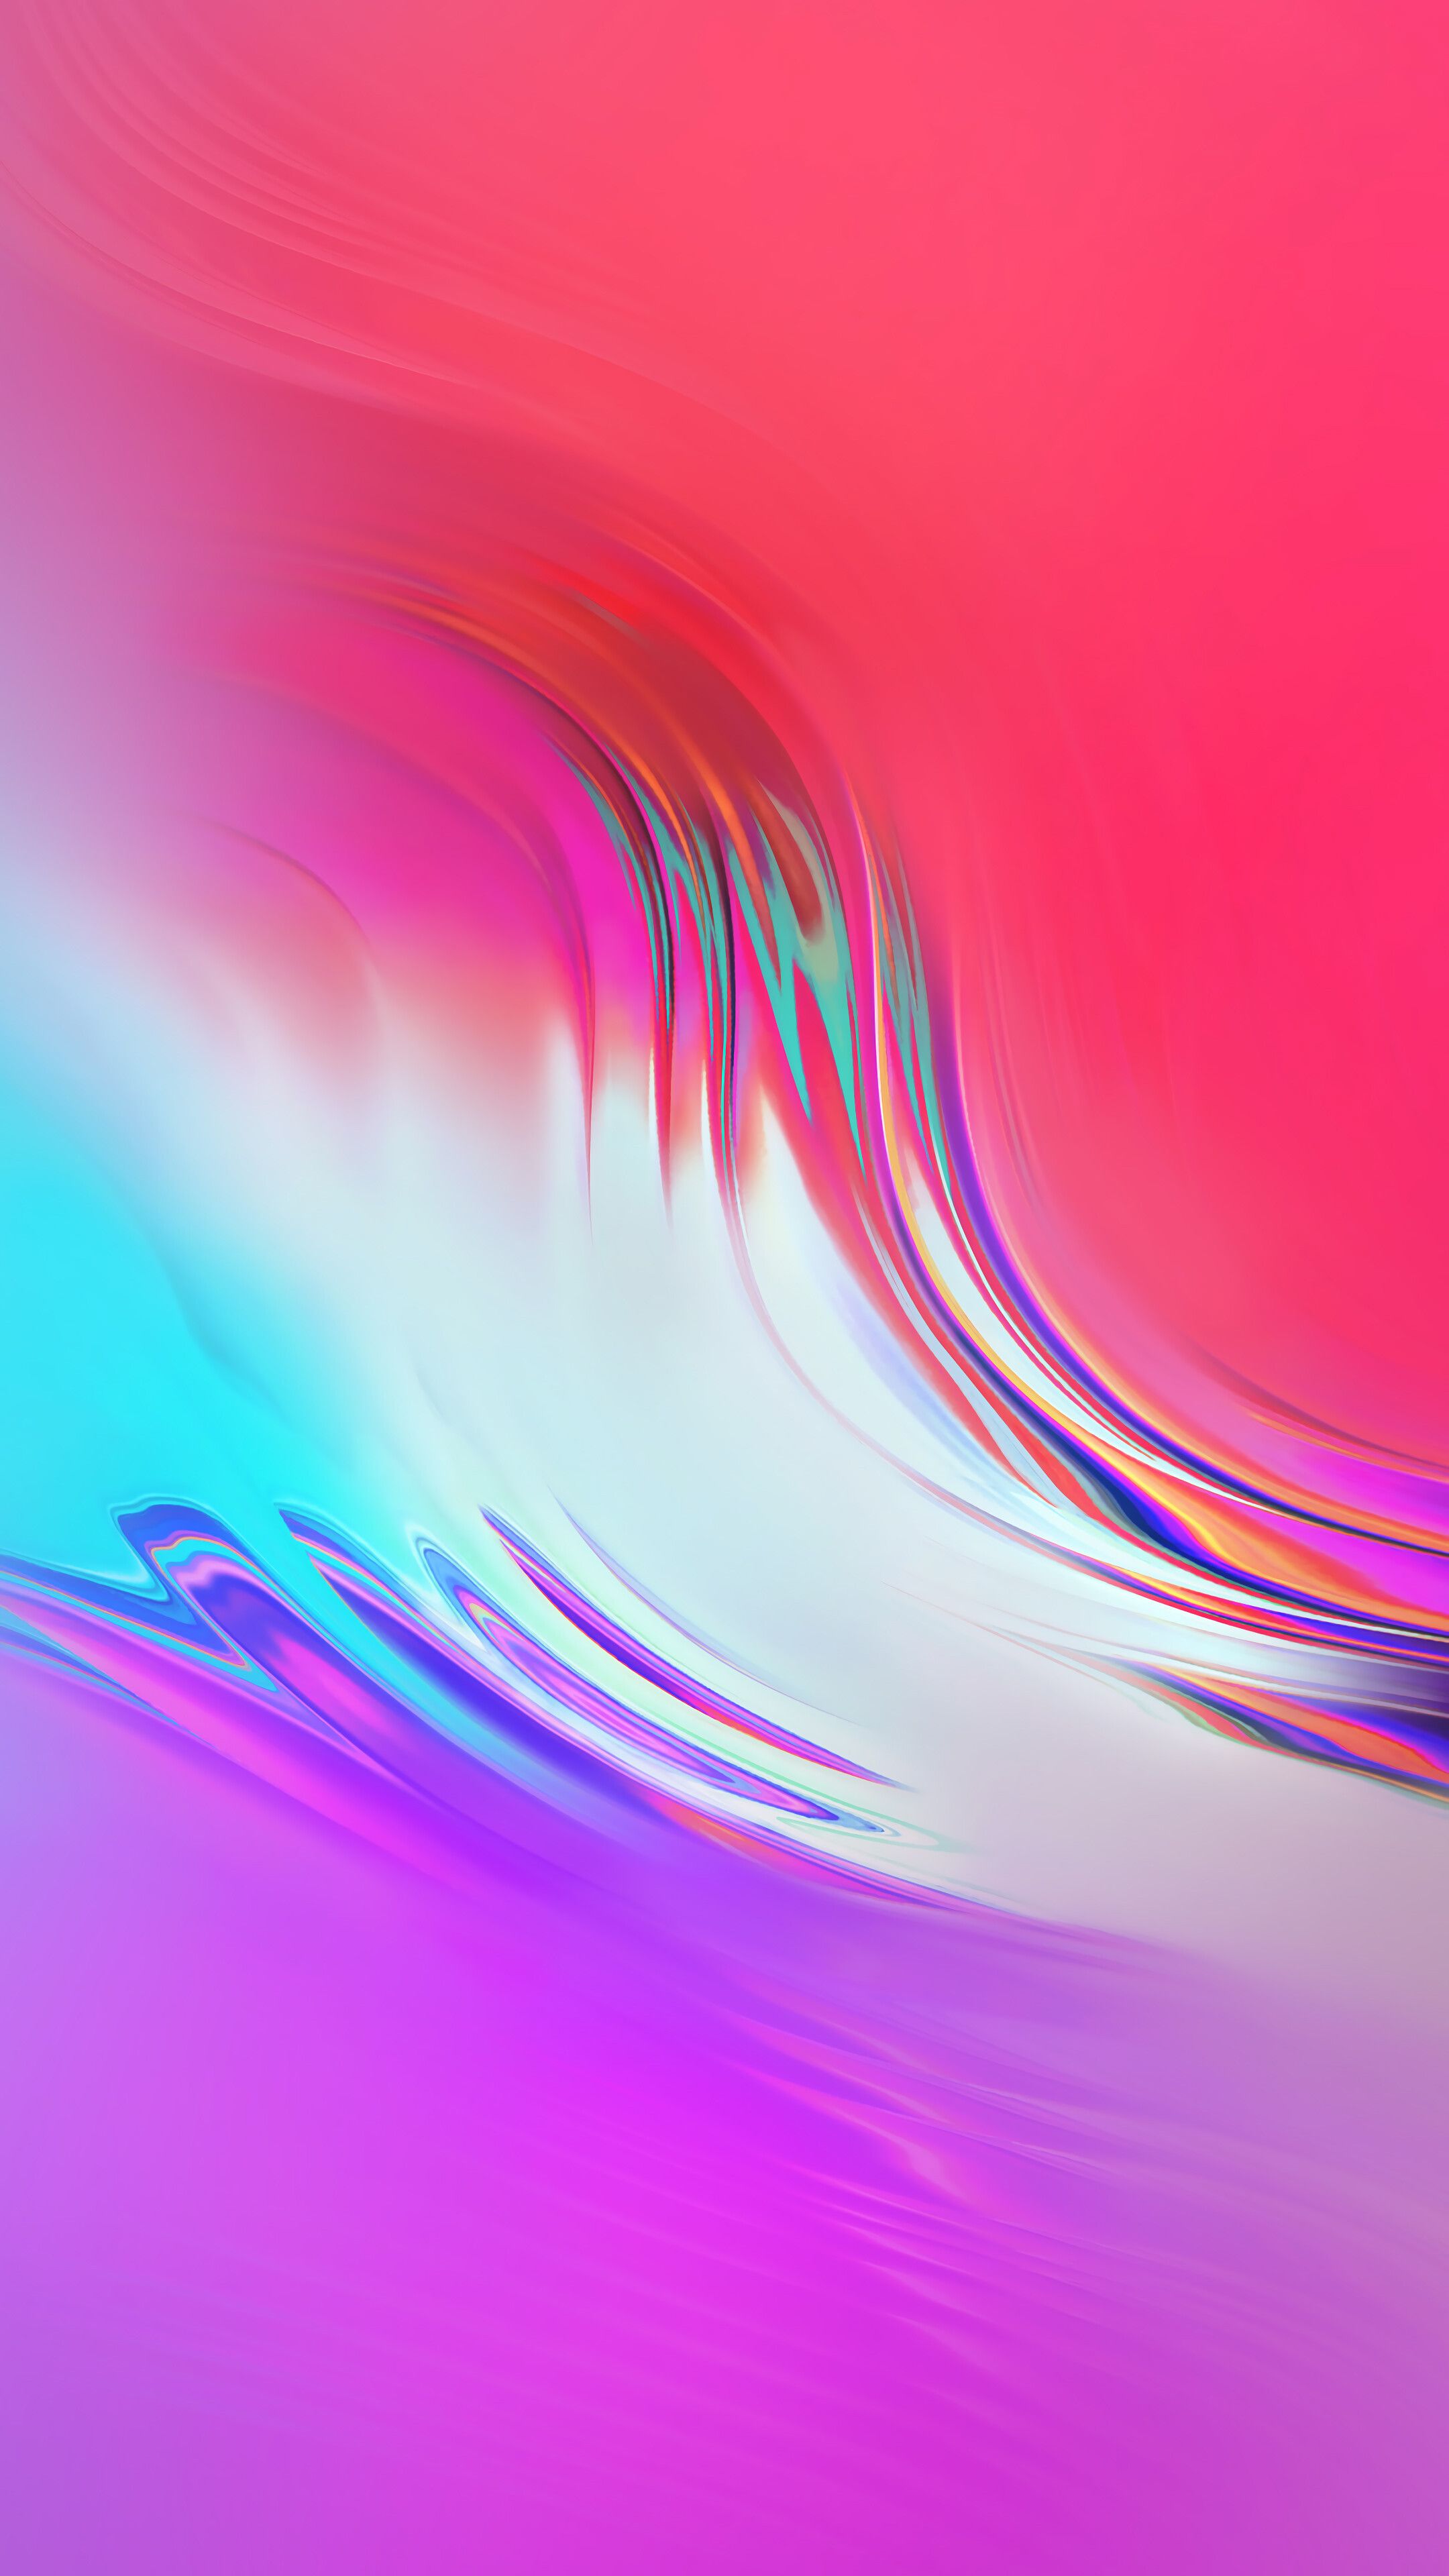 Beautiful, Colorful, Abstract, Digital Art, 4K phone HD Wallpaper, Image, Background, Photo and Picture